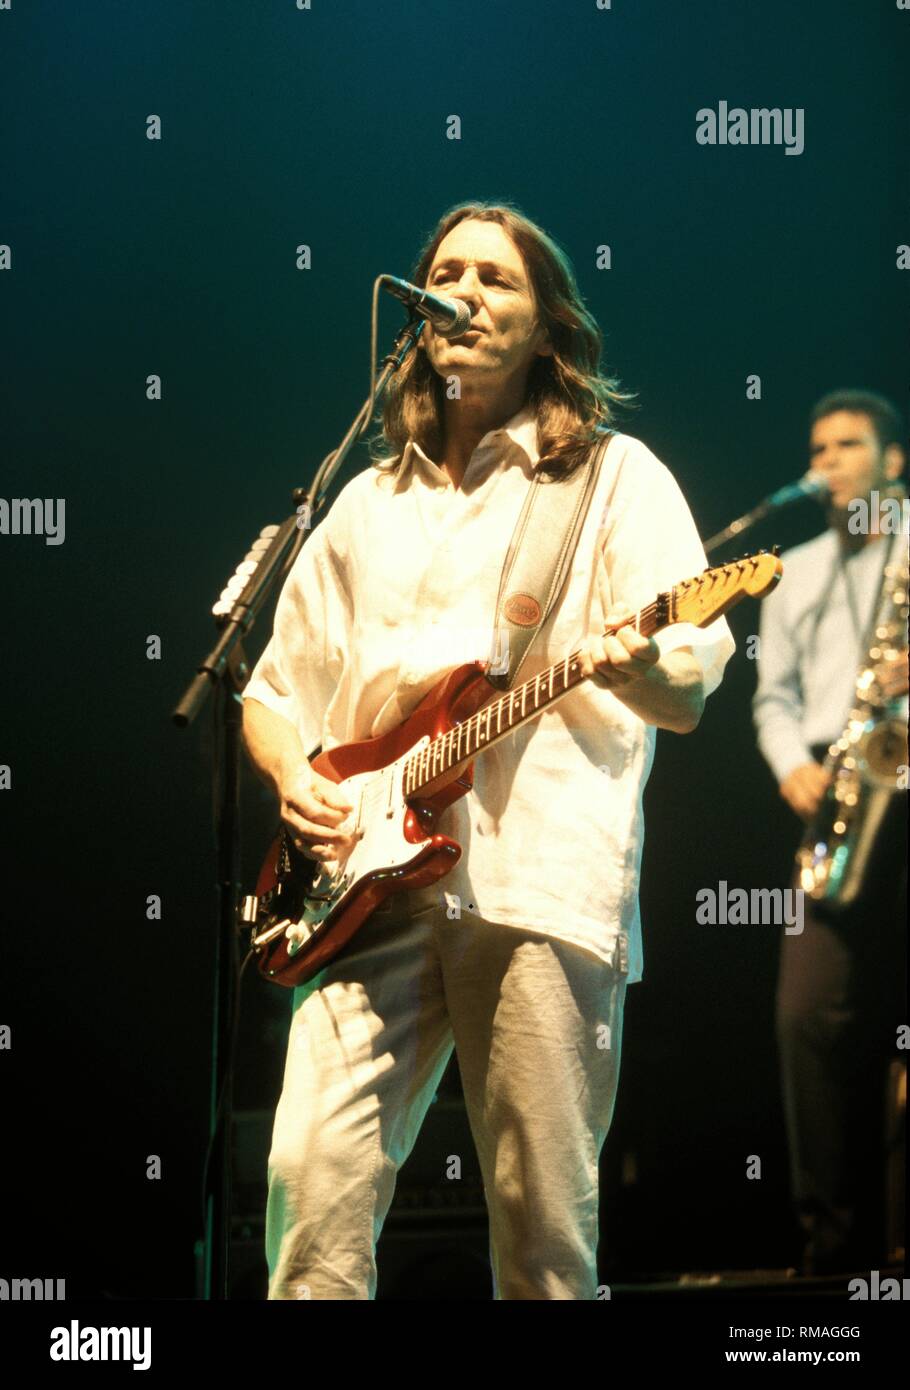 Musician Roger Hodgson is shown performing on stage during a 'live' concert appearance with Ringo Starr & His All Starr Band. Stock Photo